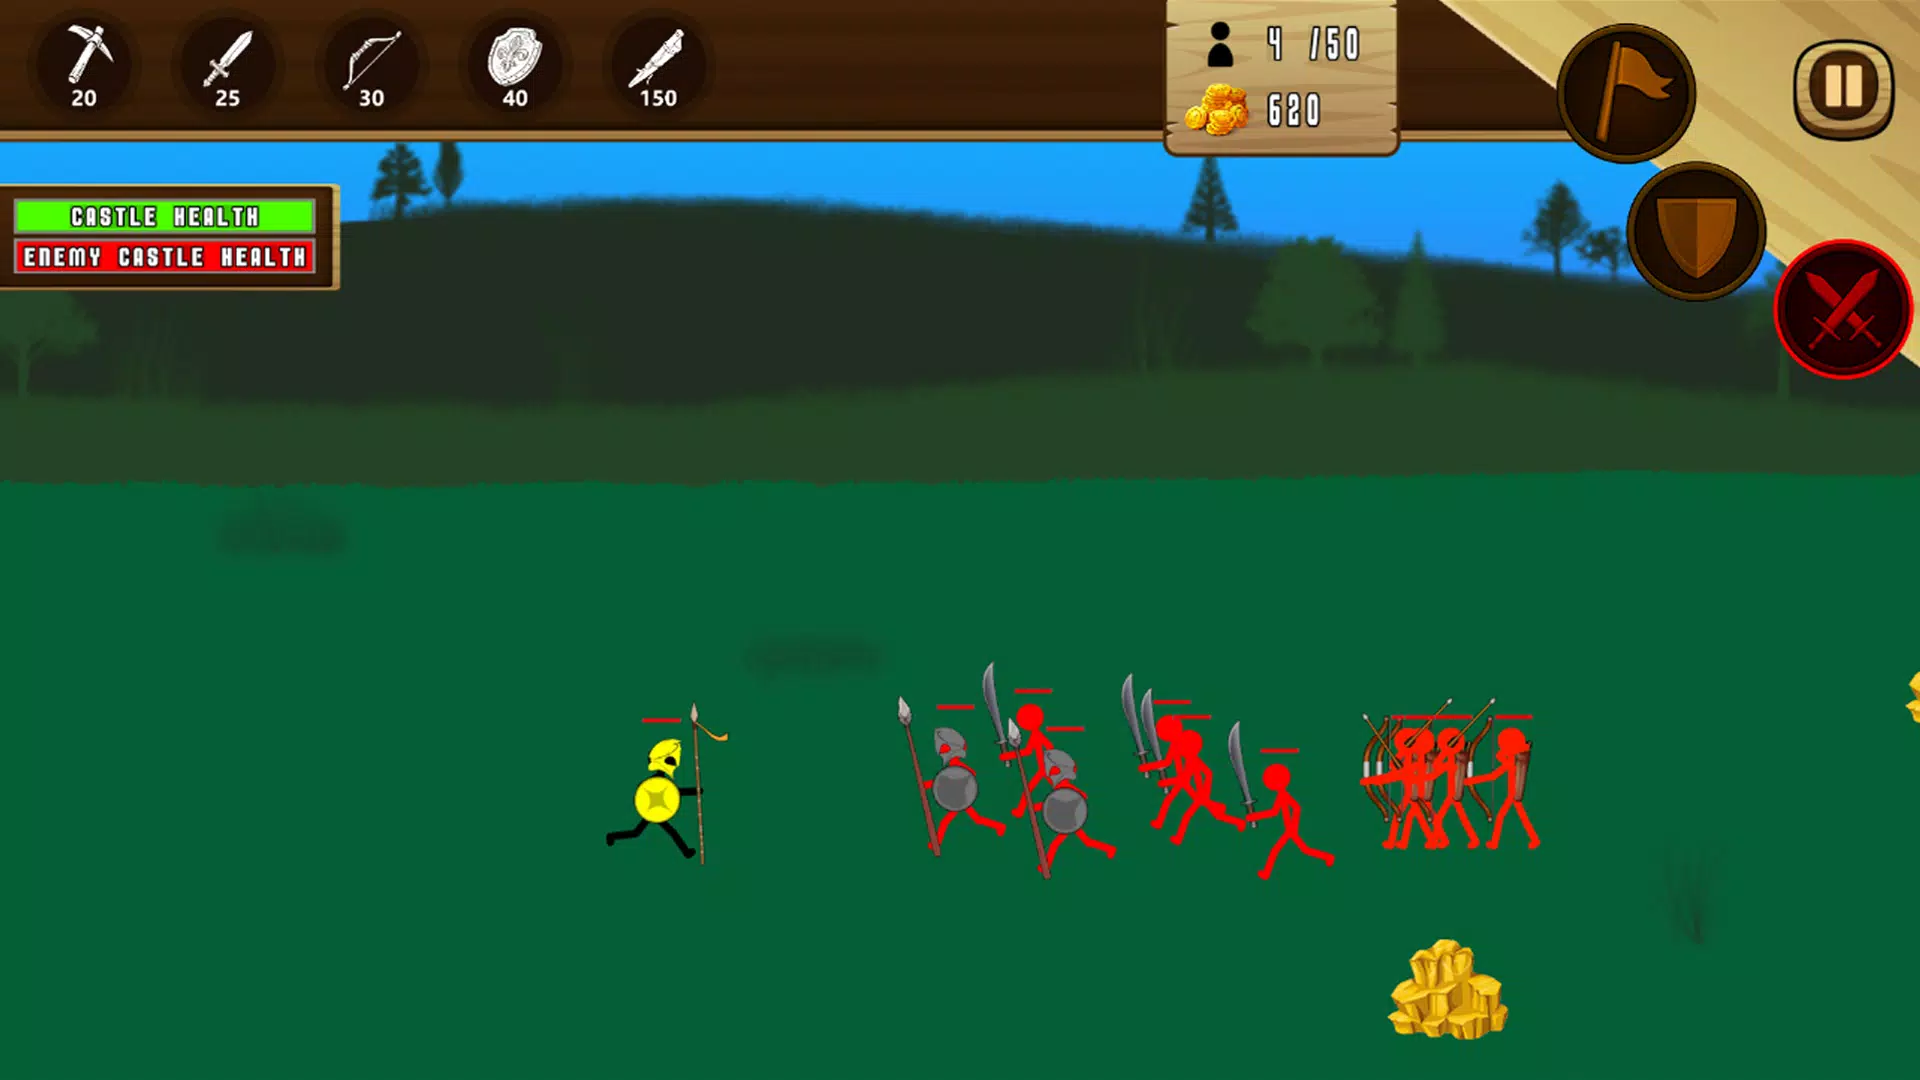 Stickman Games - Conquer Challenges with